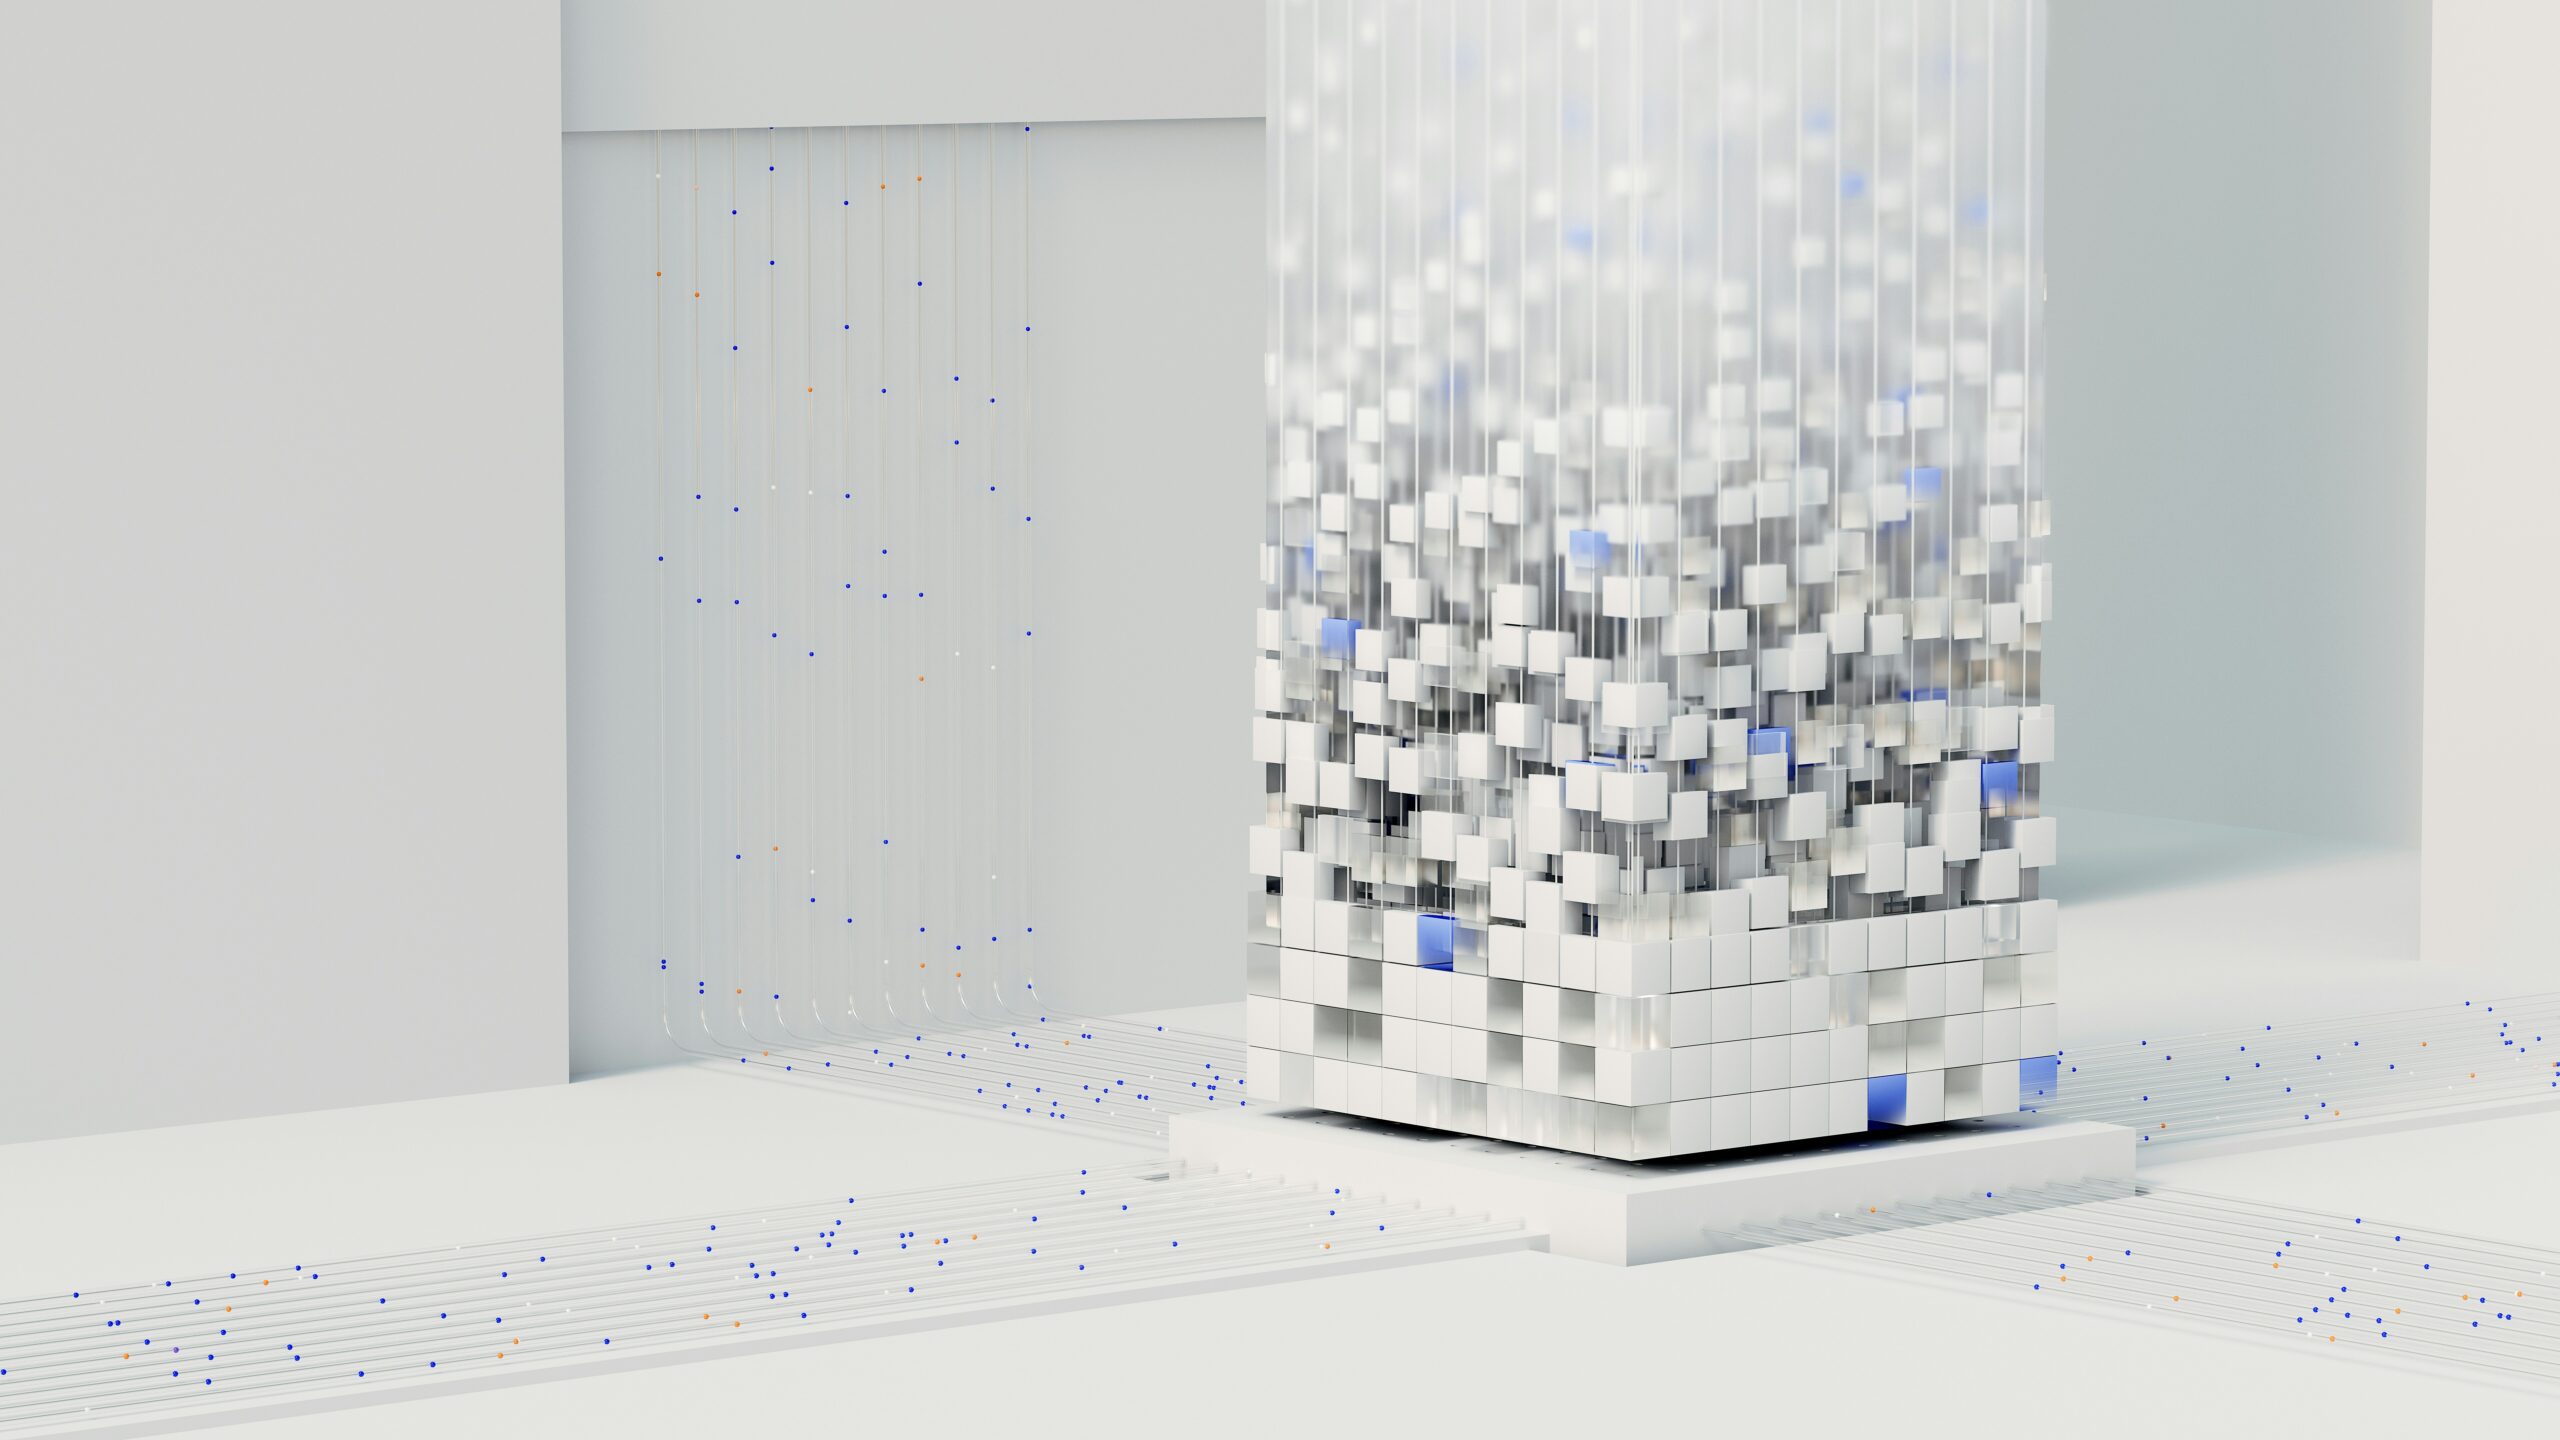 An AI-generated image of several white cubes stacking together to form a column